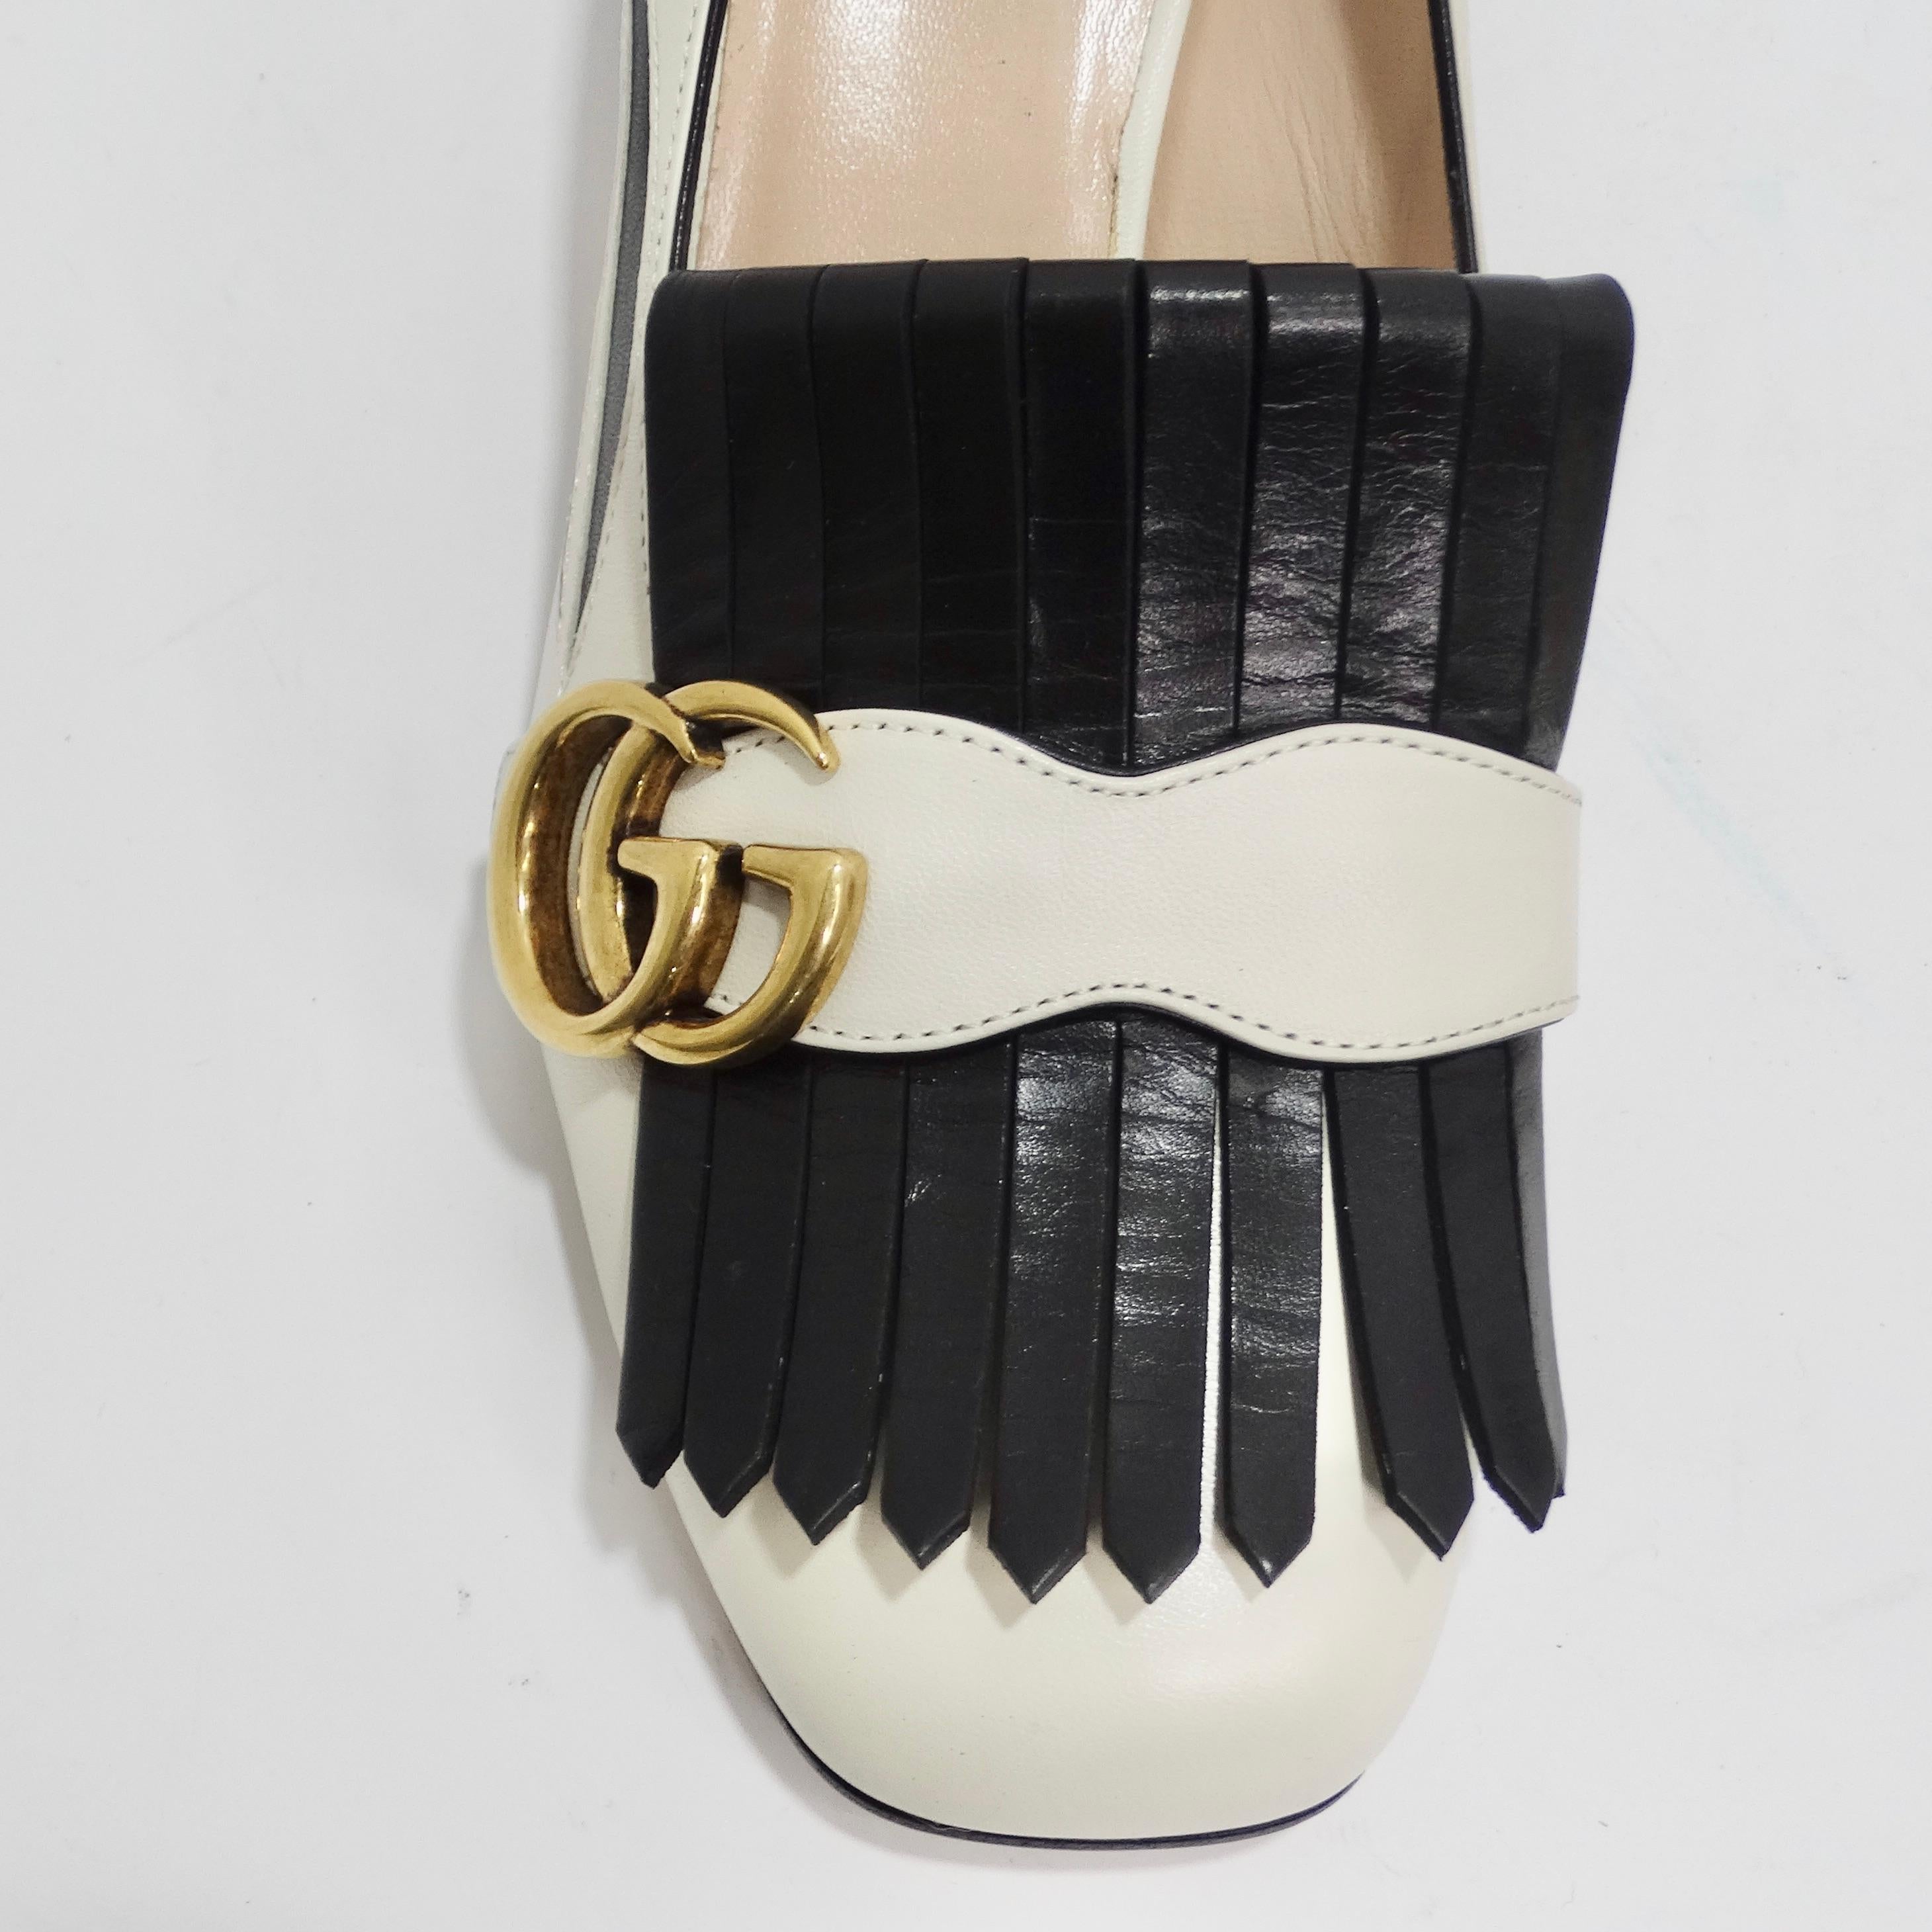 Gucci Marmont Fringe Leather 55mm Loafer In Excellent Condition For Sale In Scottsdale, AZ